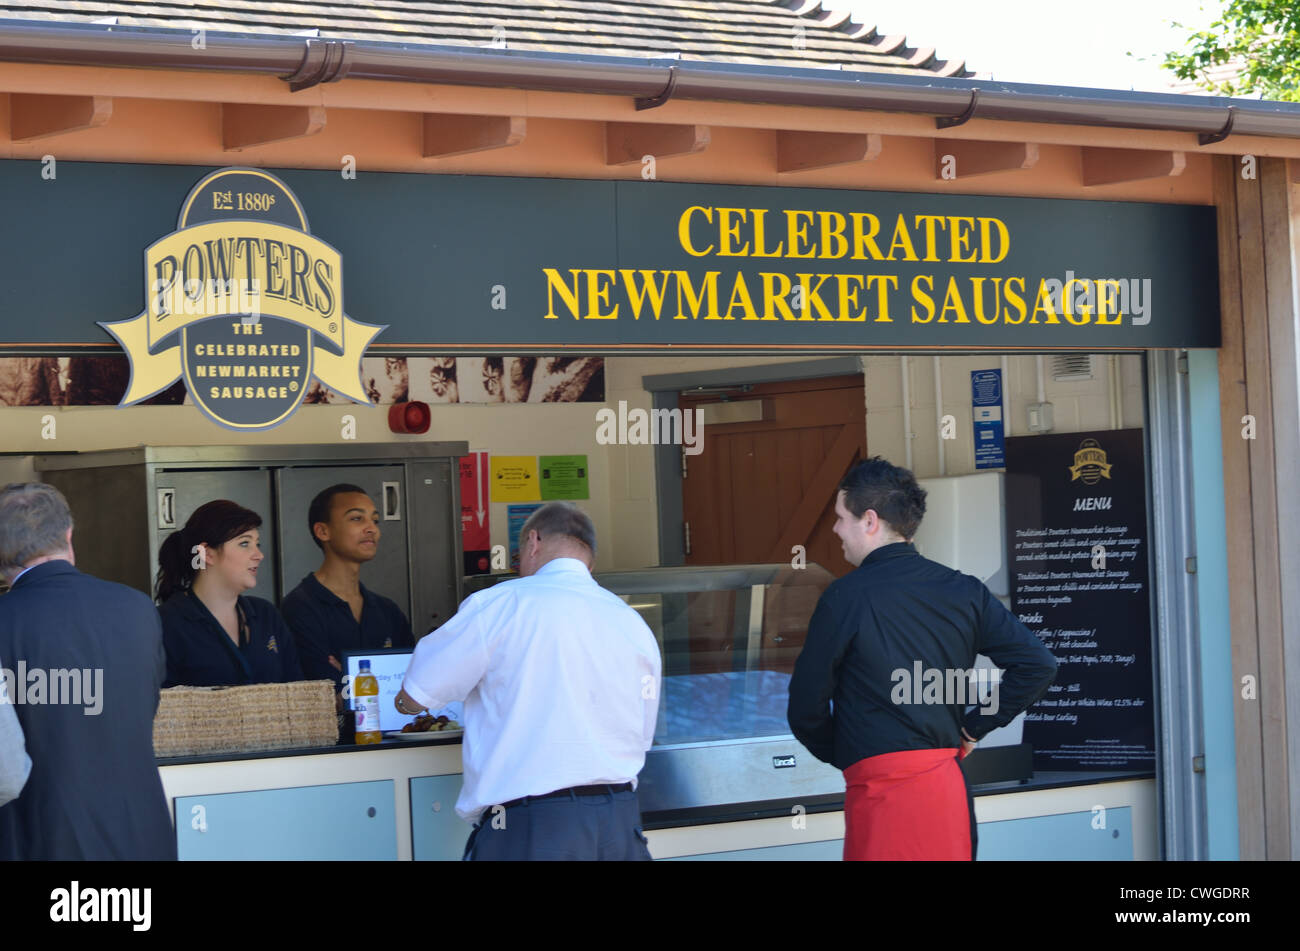 Powters newmarket sausage stall Stock Photo